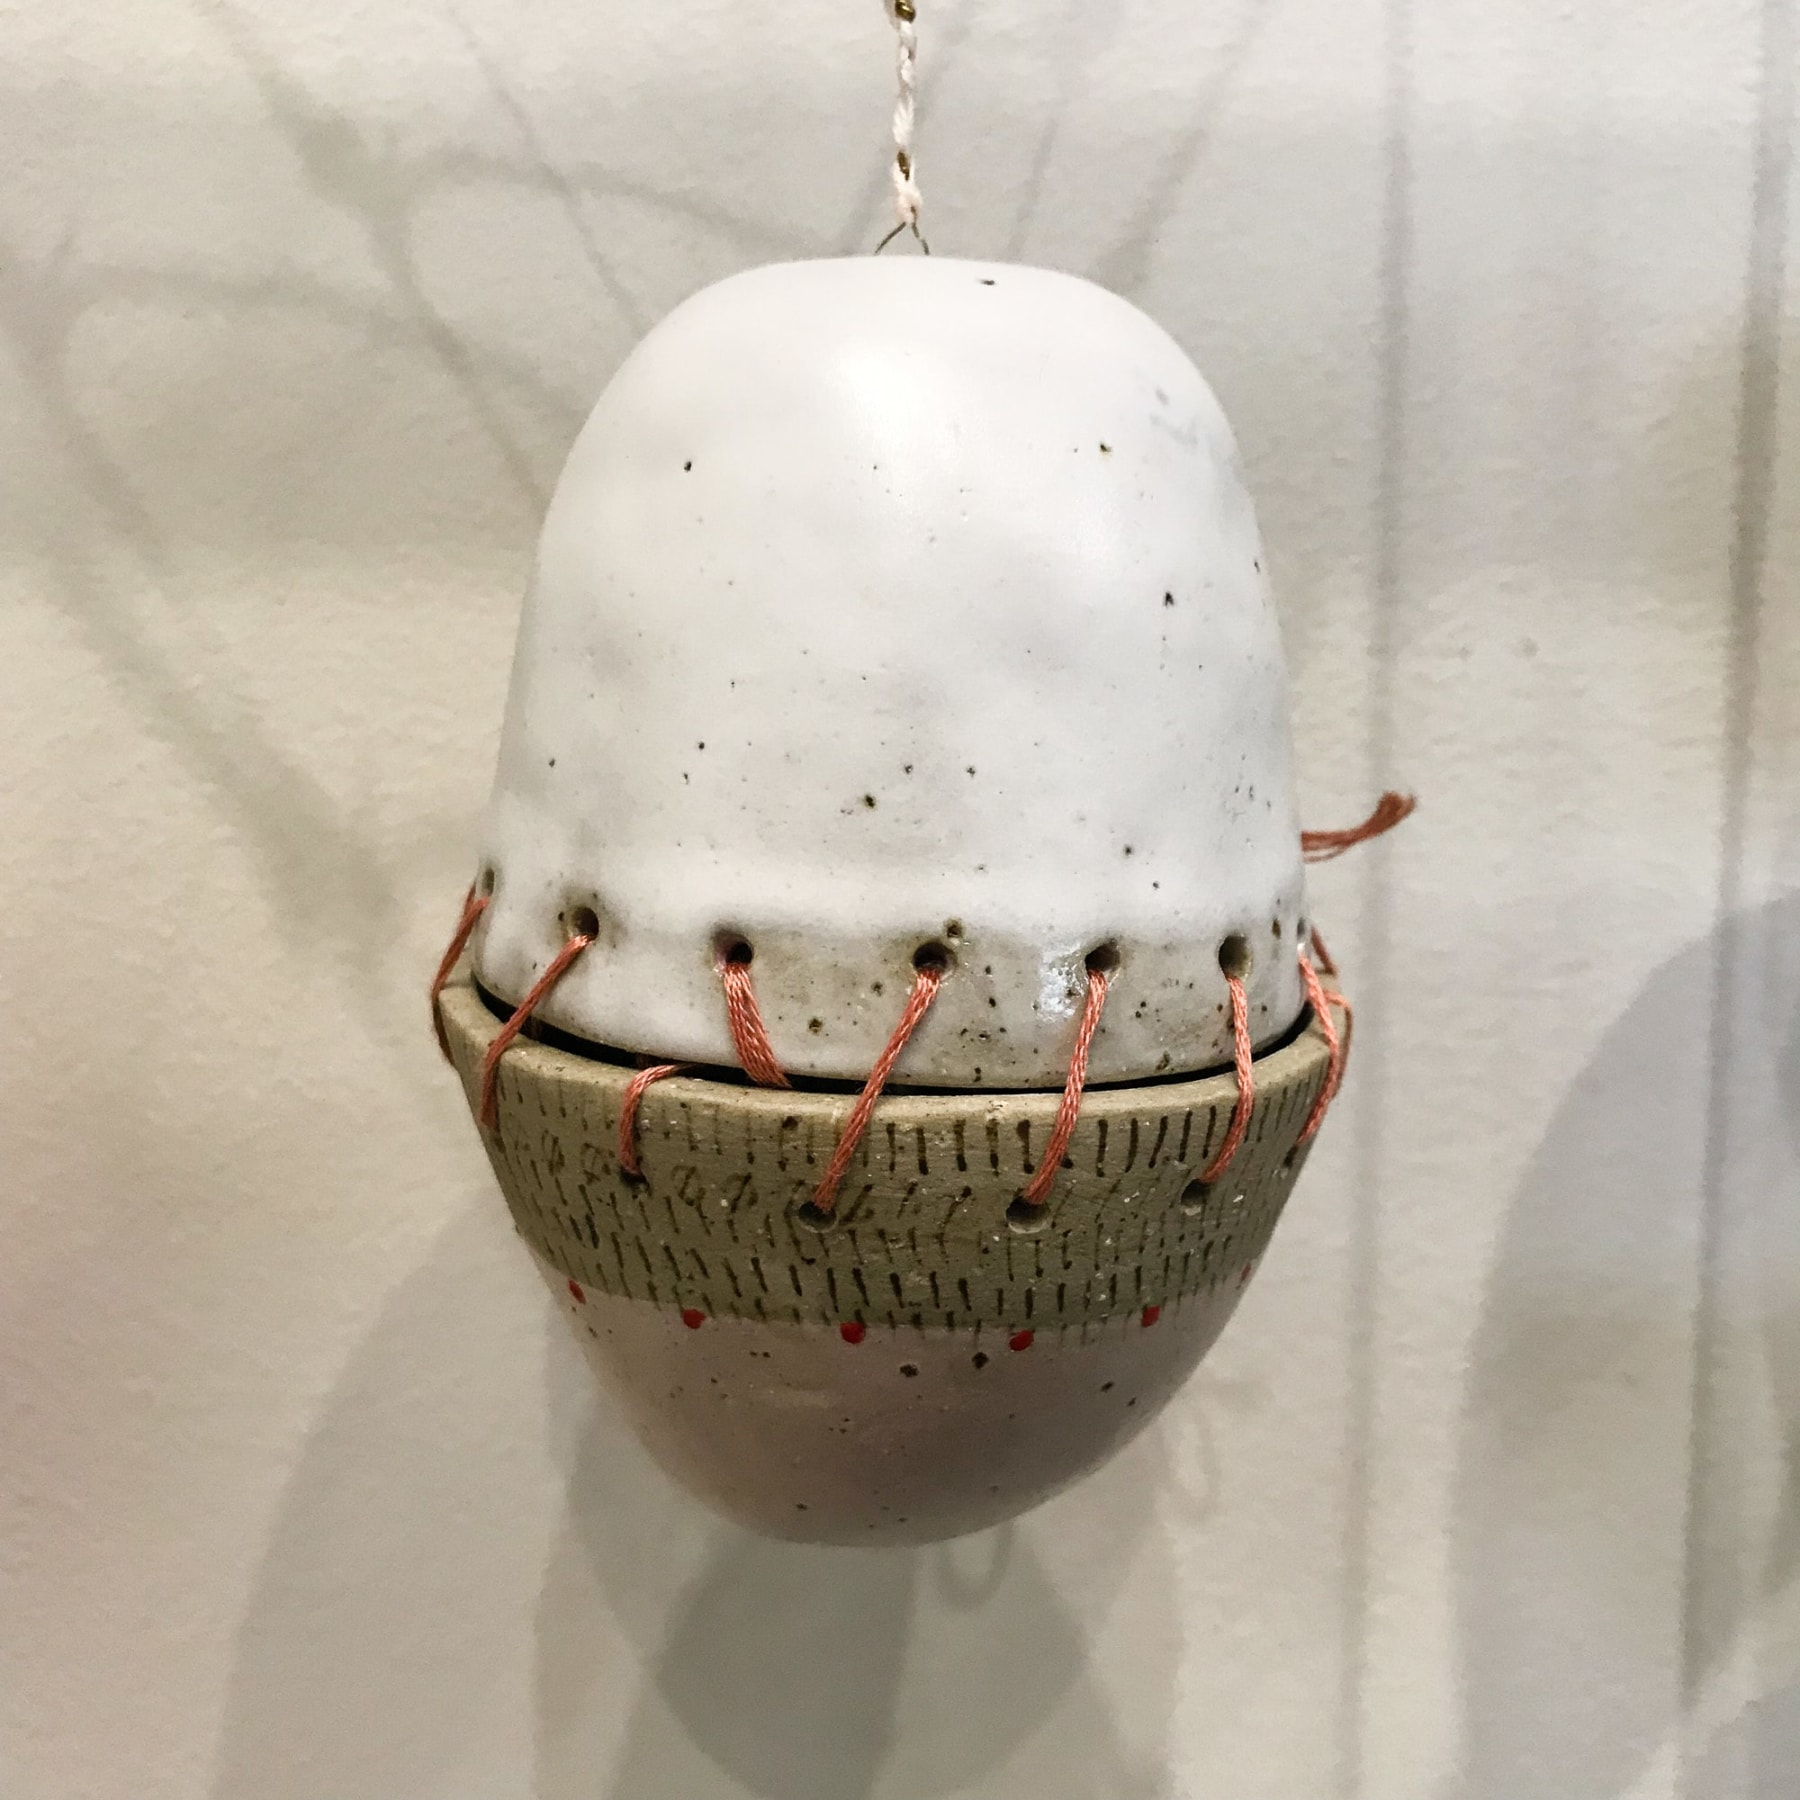 Amanda Humphries, Closed Loop Circuit (Fading Lucretius) recycled stoneware with thread, bell, wire, beads ​2018